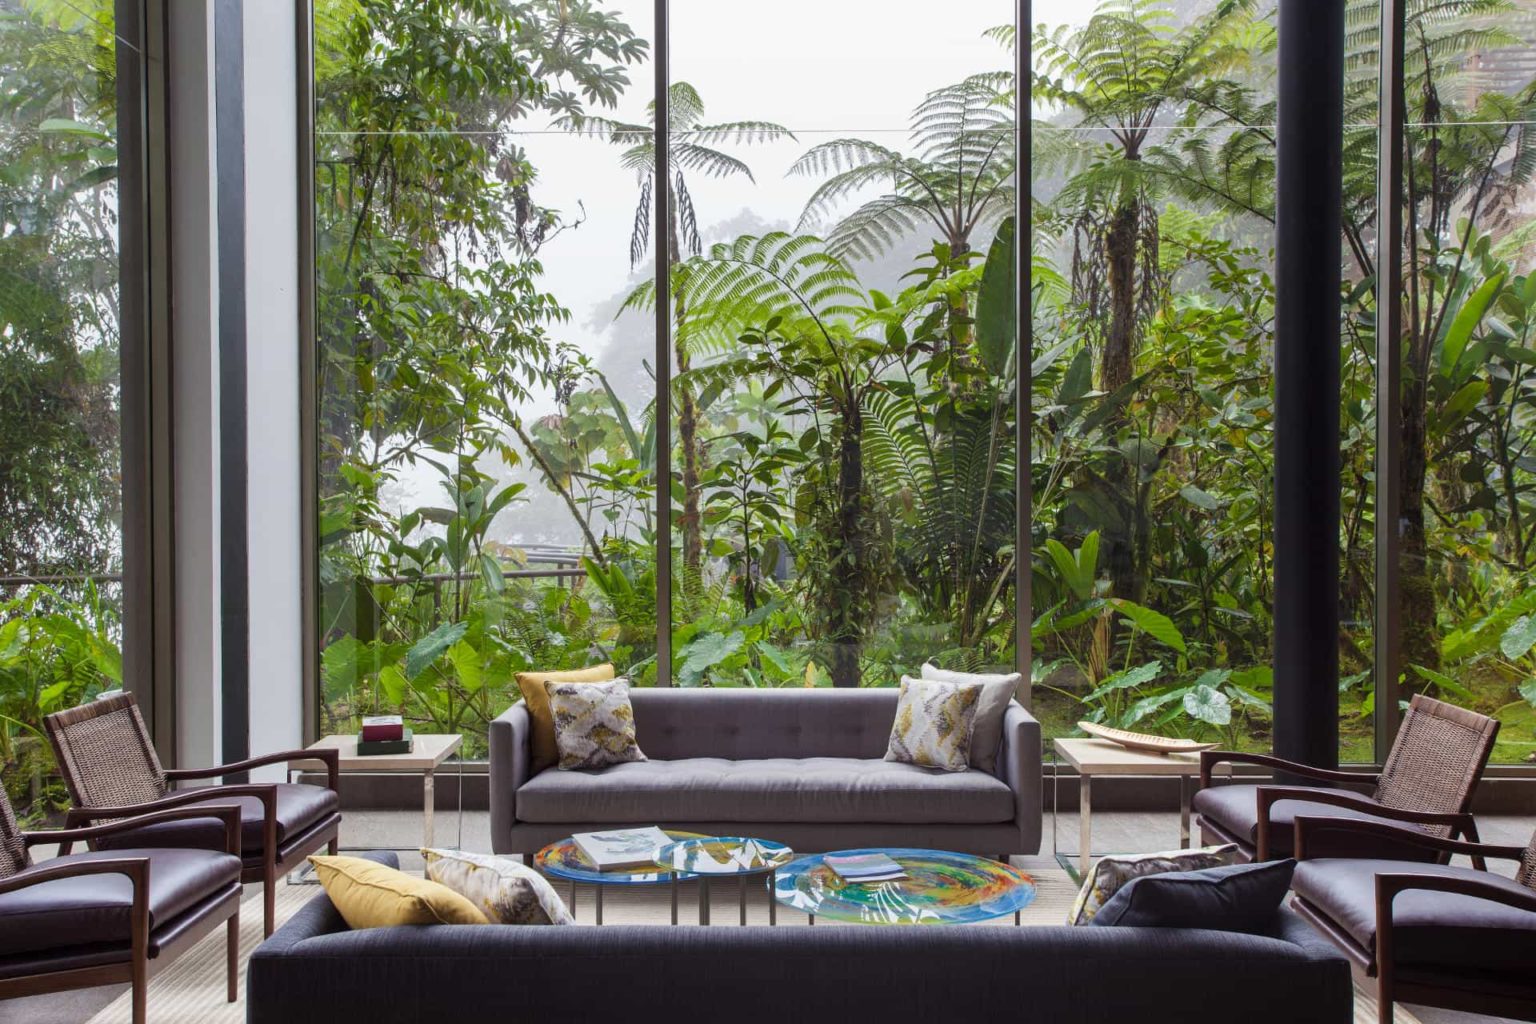 couches in front of a large glass window with trees